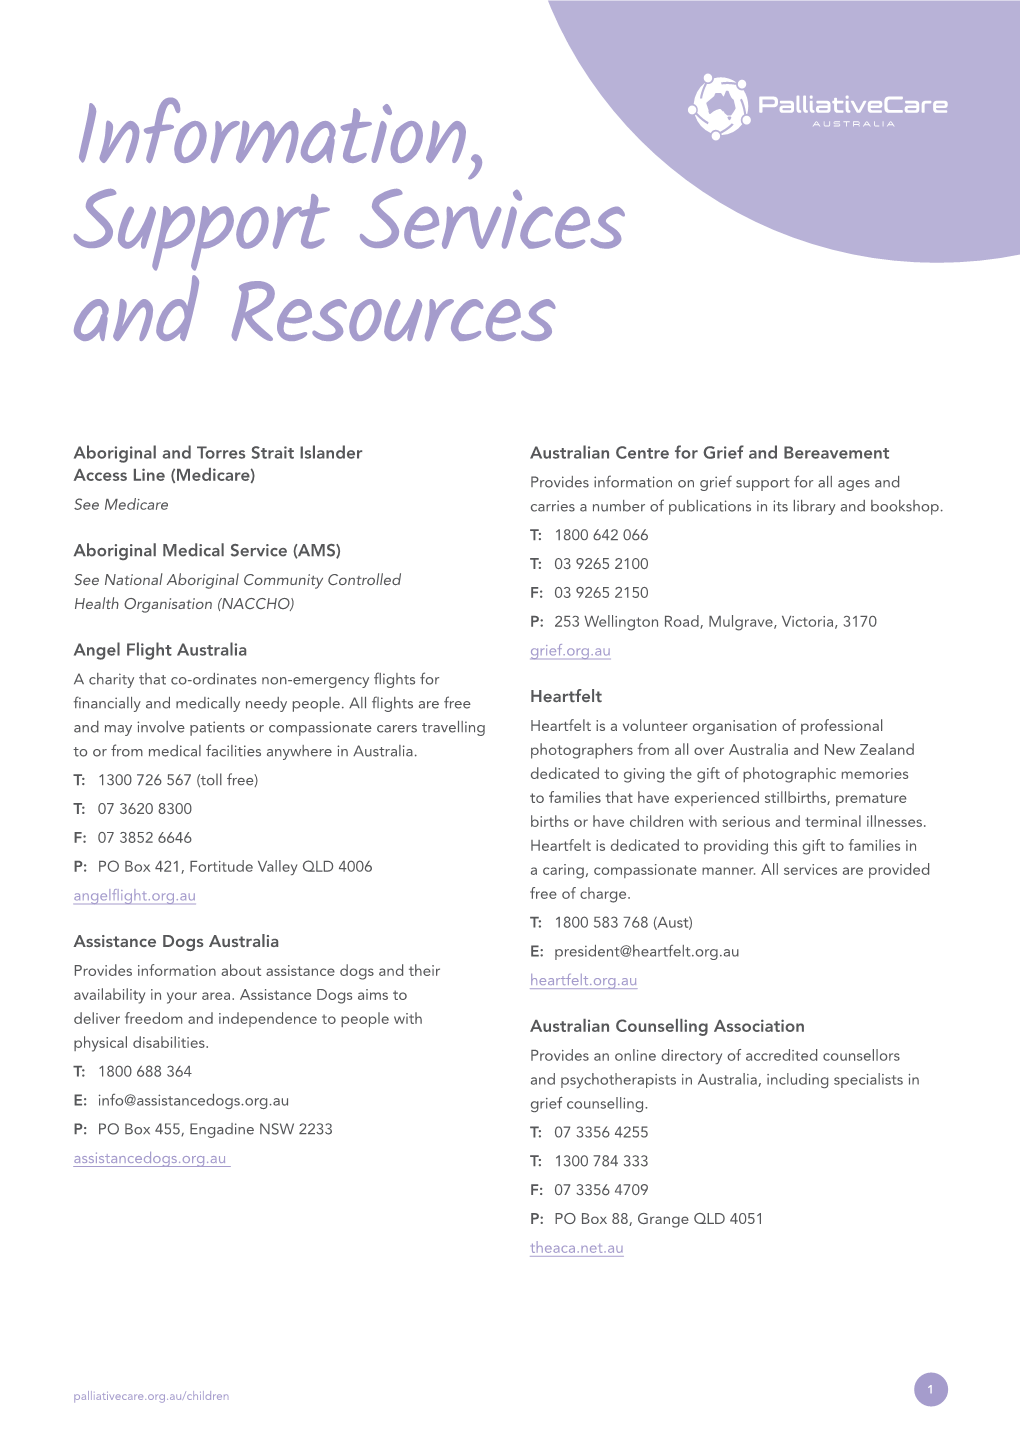 Information, Support Services and Resources